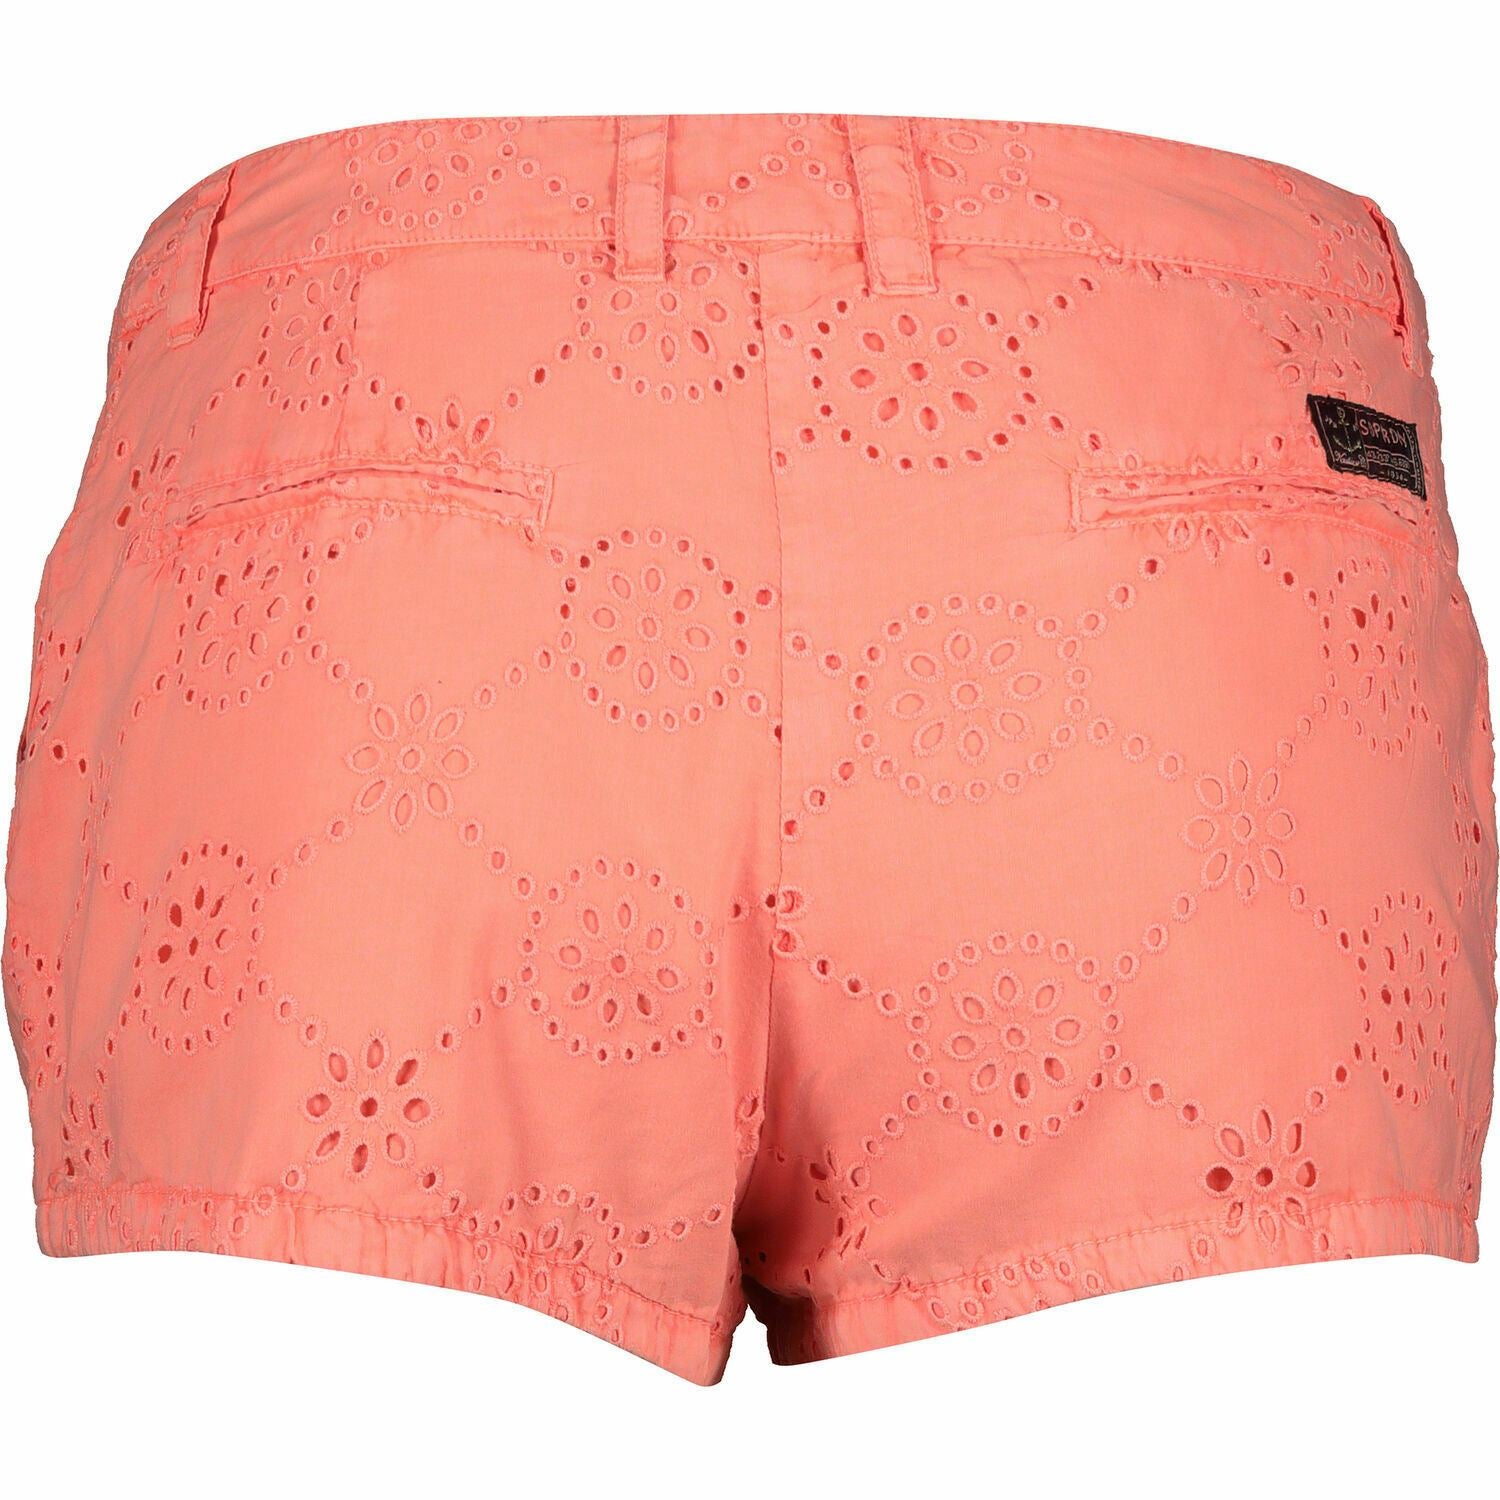 SUPERDRY Women's BRODERIE Chino Shorts, Fluro Coral, size S - UK 10